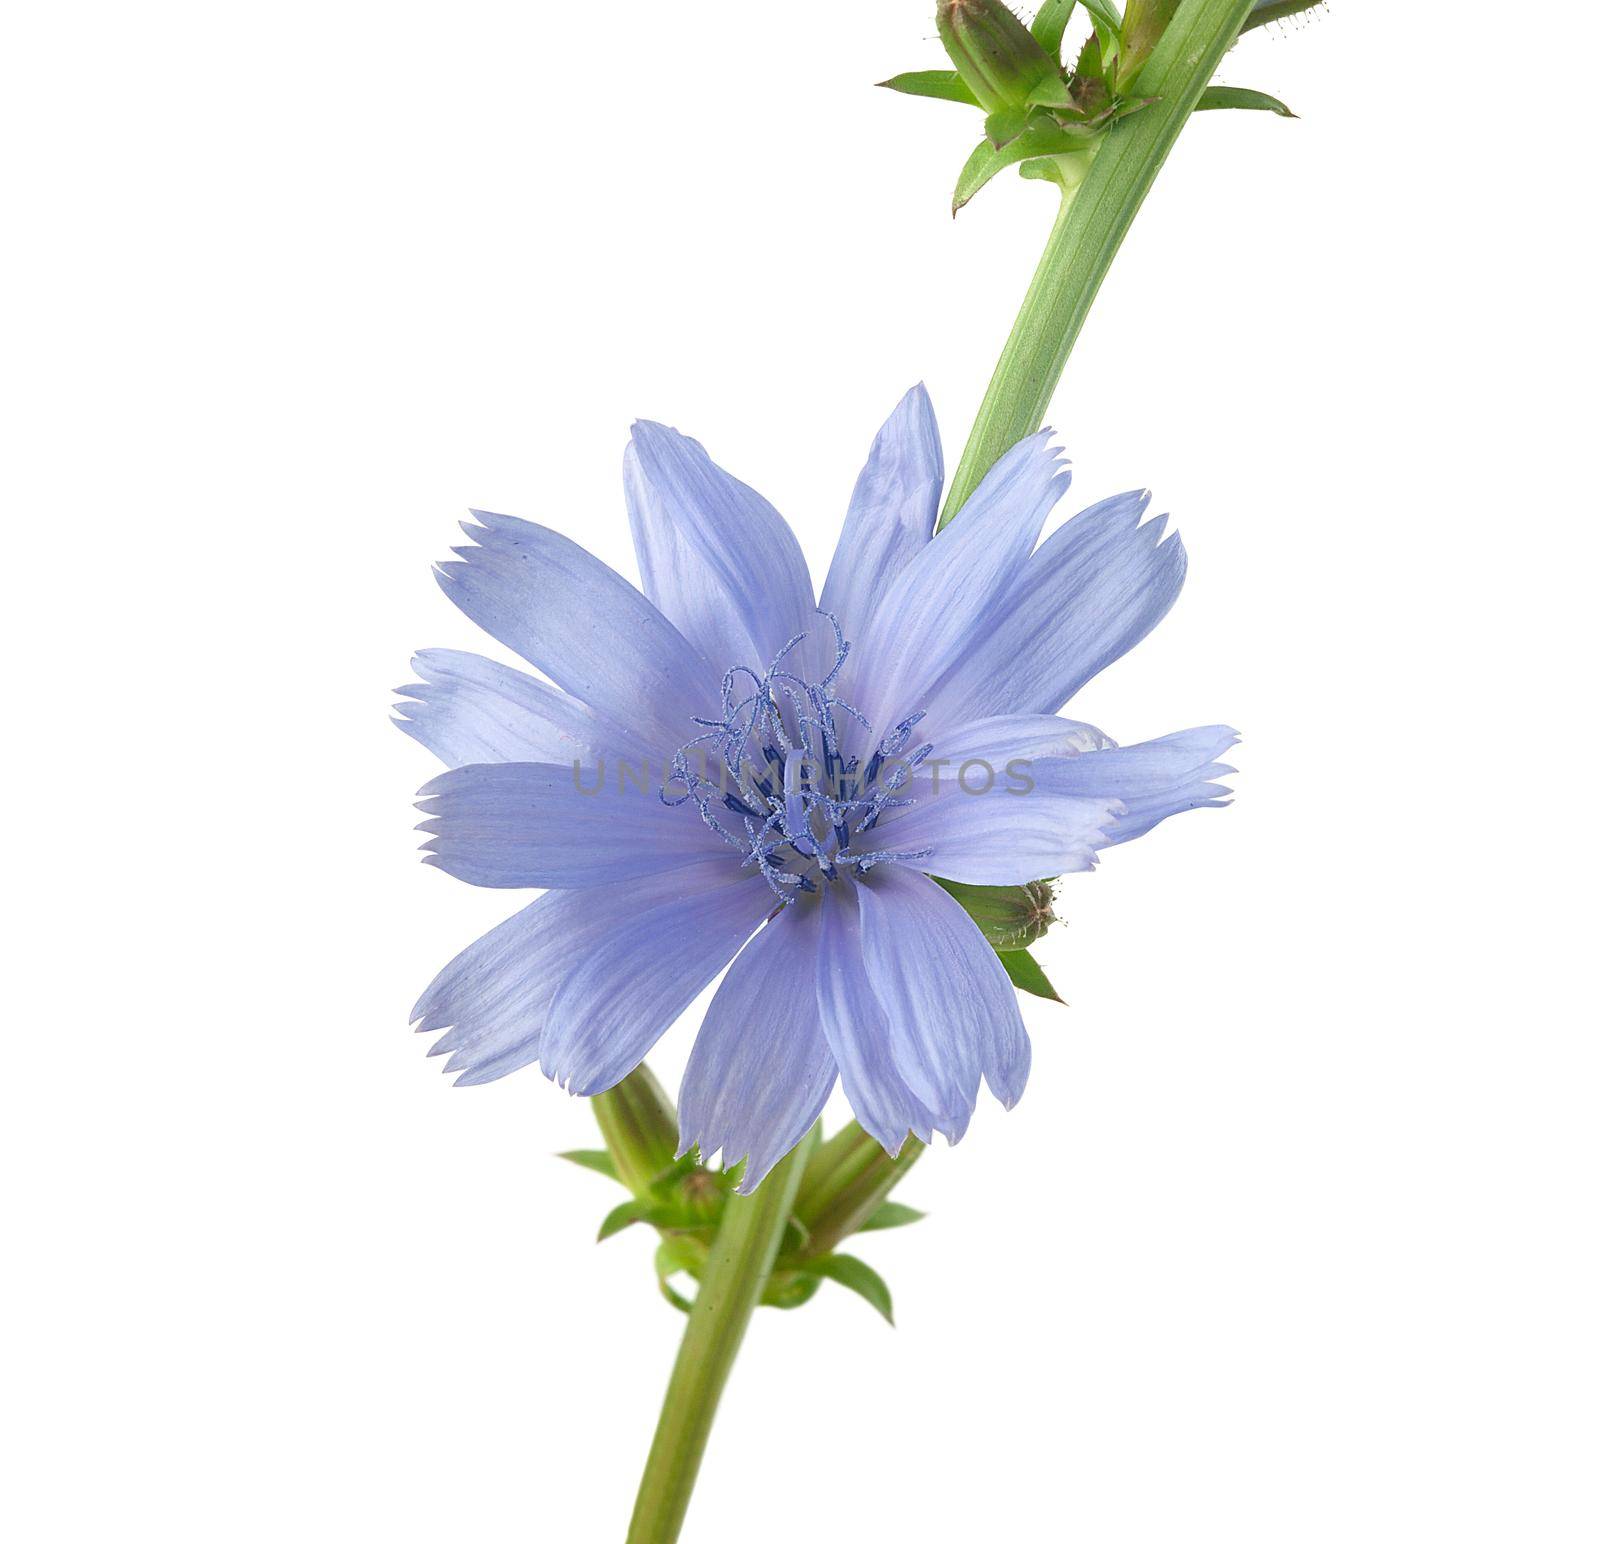 Chicory flower on the white by Angorius